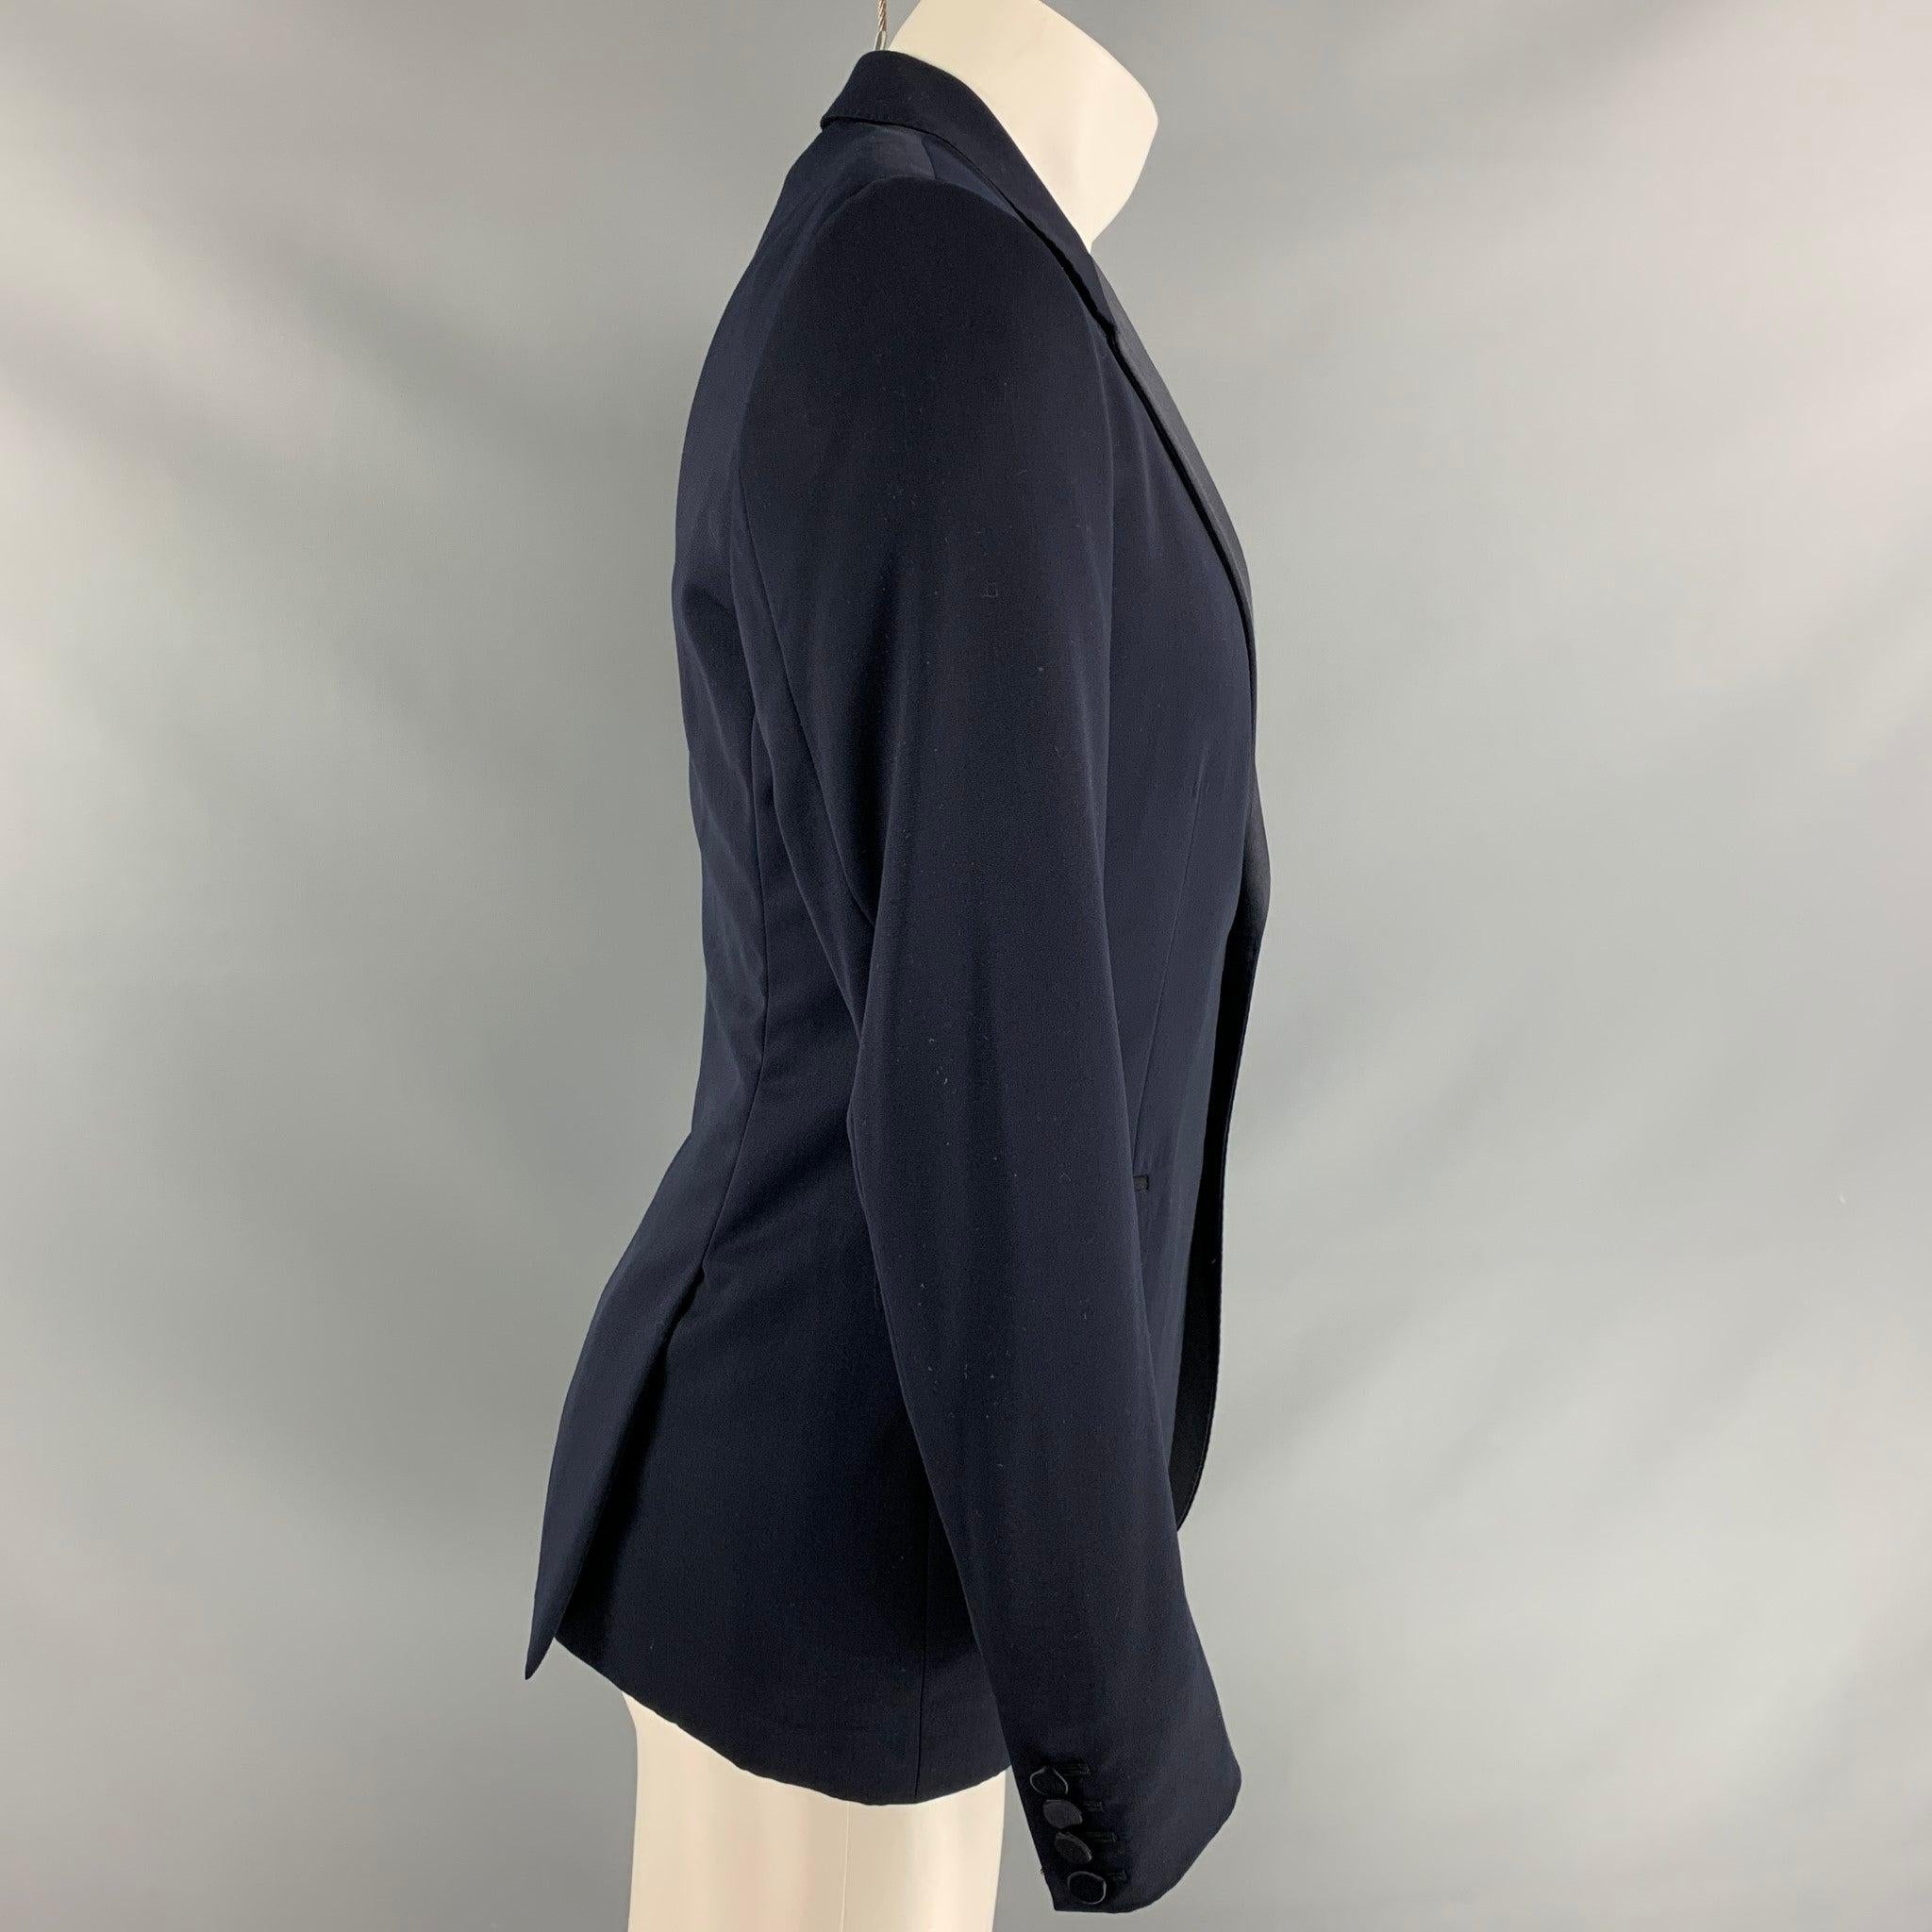 BURBERRY PRORSUM tuxedo sport coat, fully lined comes in navy blue virgin wool featuring a two button closure, flap patch pockets and peak lapel. Made in Italy. Excellent Pre-Owned Condition.  

Marked:   50 

Measurements: 
 
Shoulder: 17 inChest: